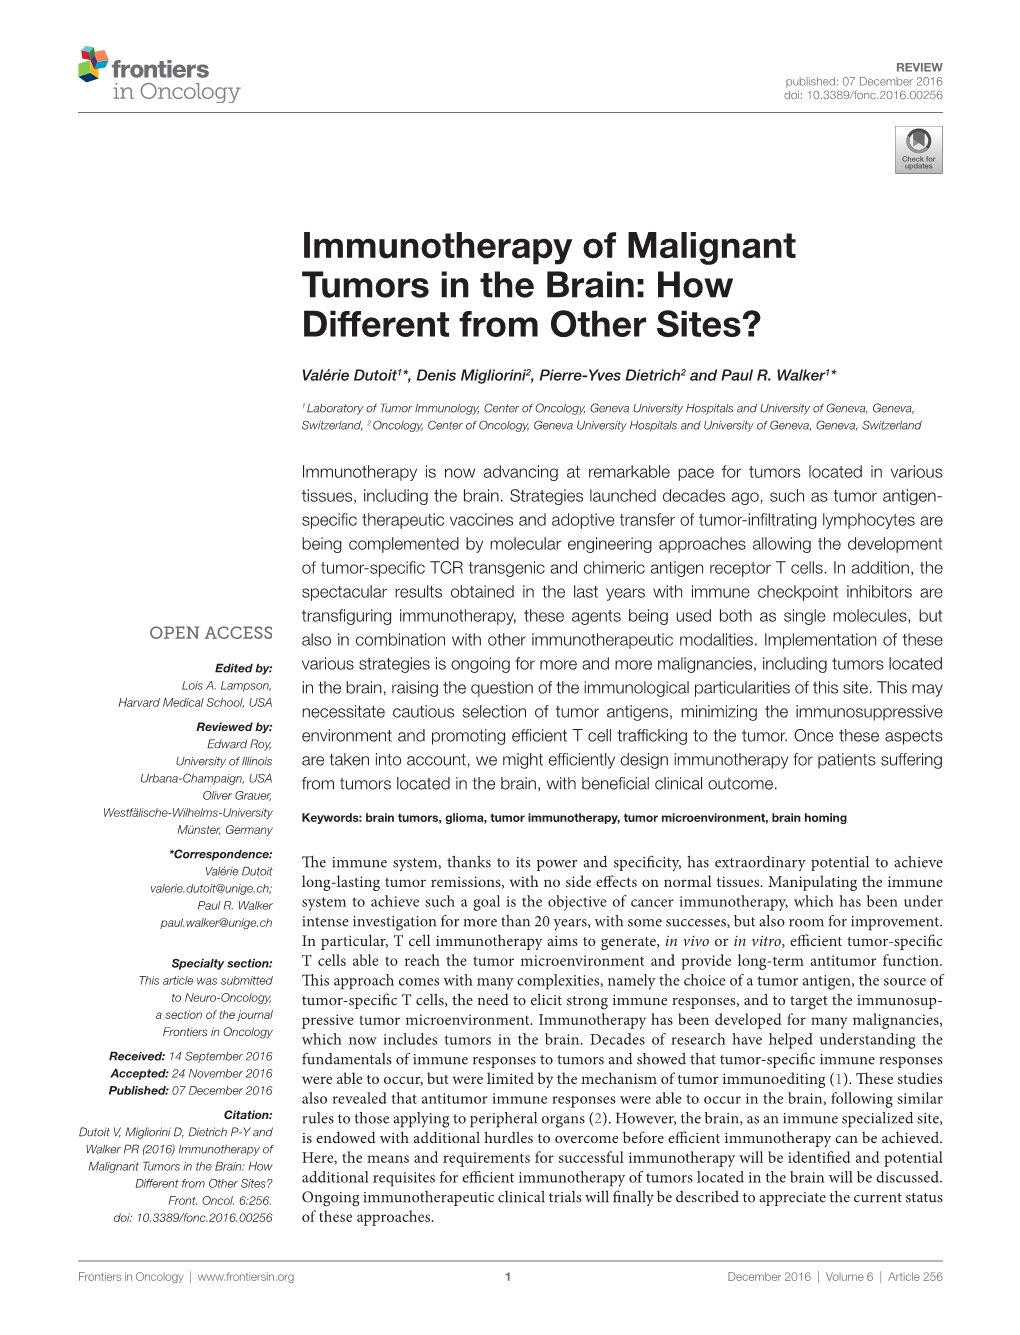 Immunotherapy of Malignant Tumors in the Brain: How Different from Other Sites?